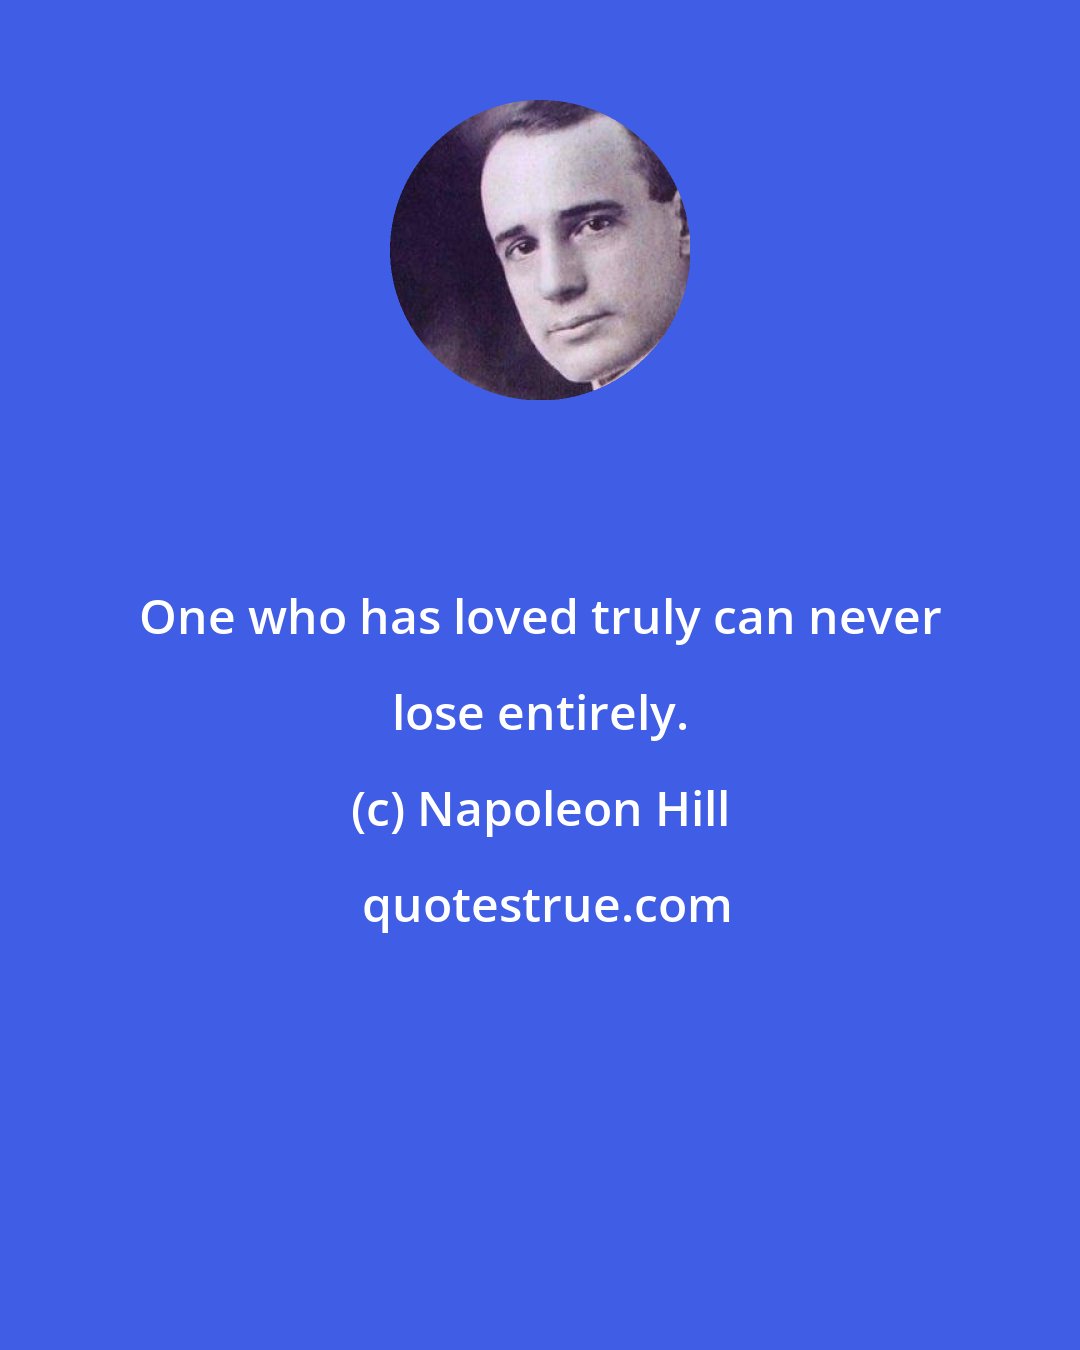 Napoleon Hill: One who has loved truly can never lose entirely.